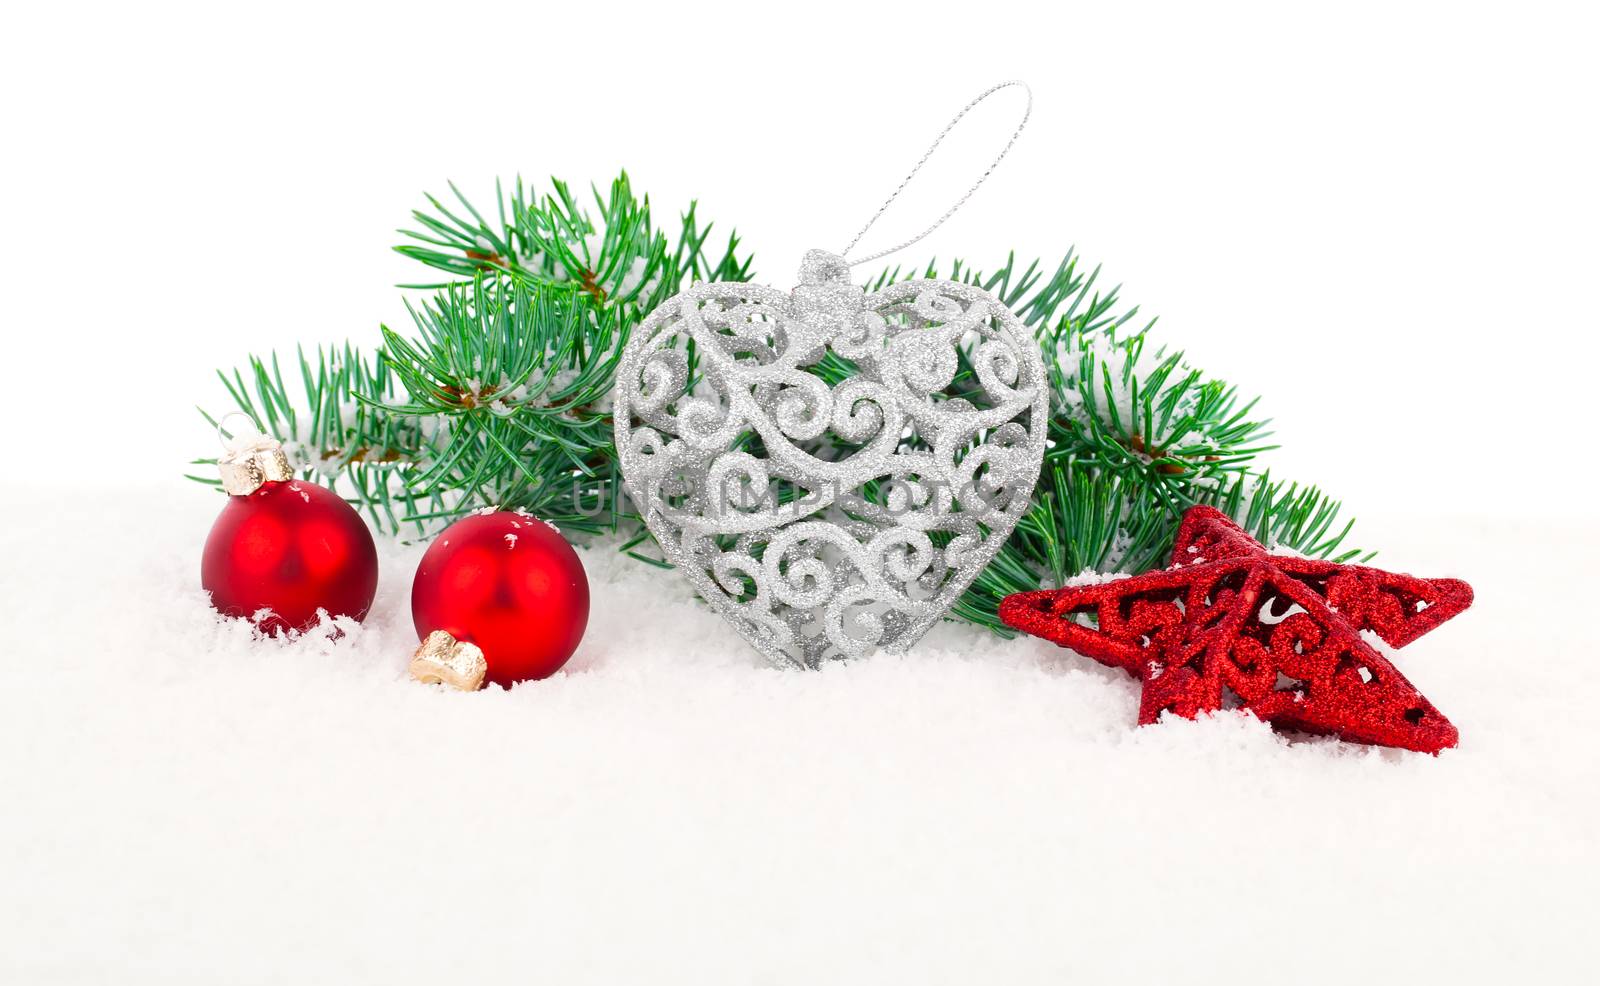 xmas decoration with copy space, isolated over white